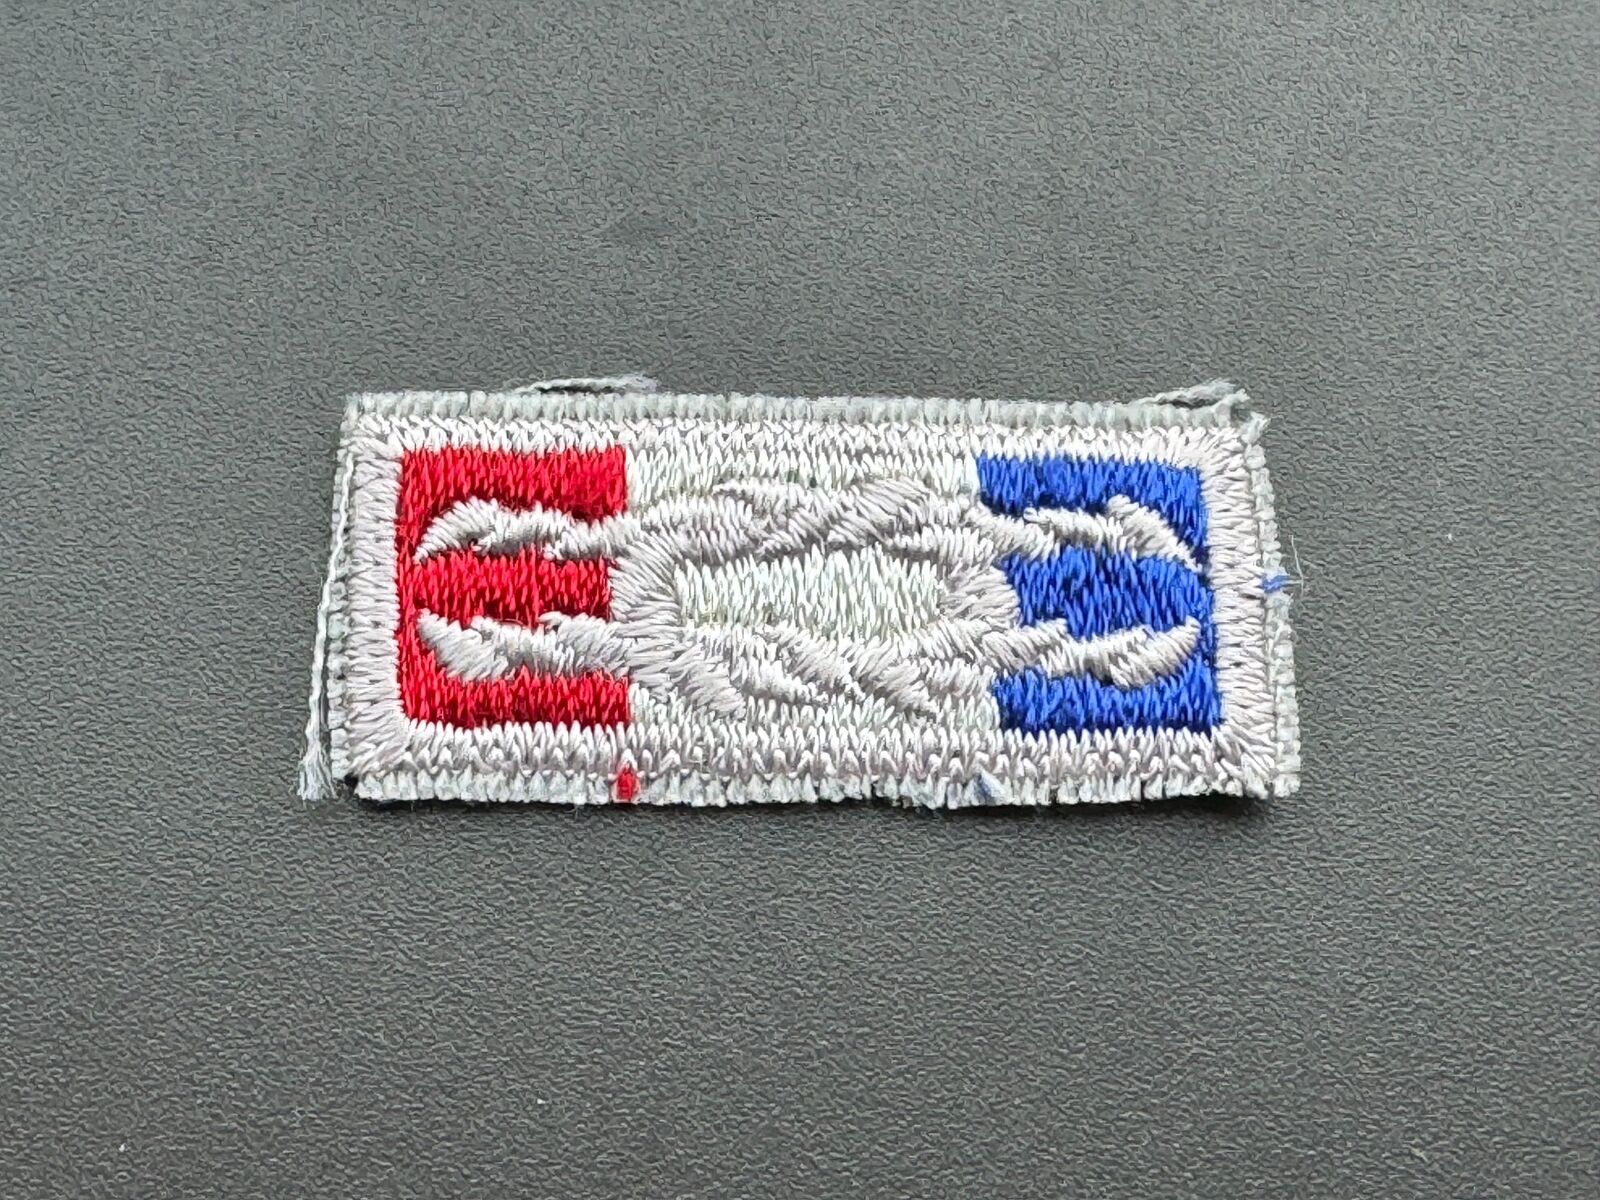 BSA, Exploring/Venturing Silver Award Square Knot Patch, Type 2 (1954-2012)